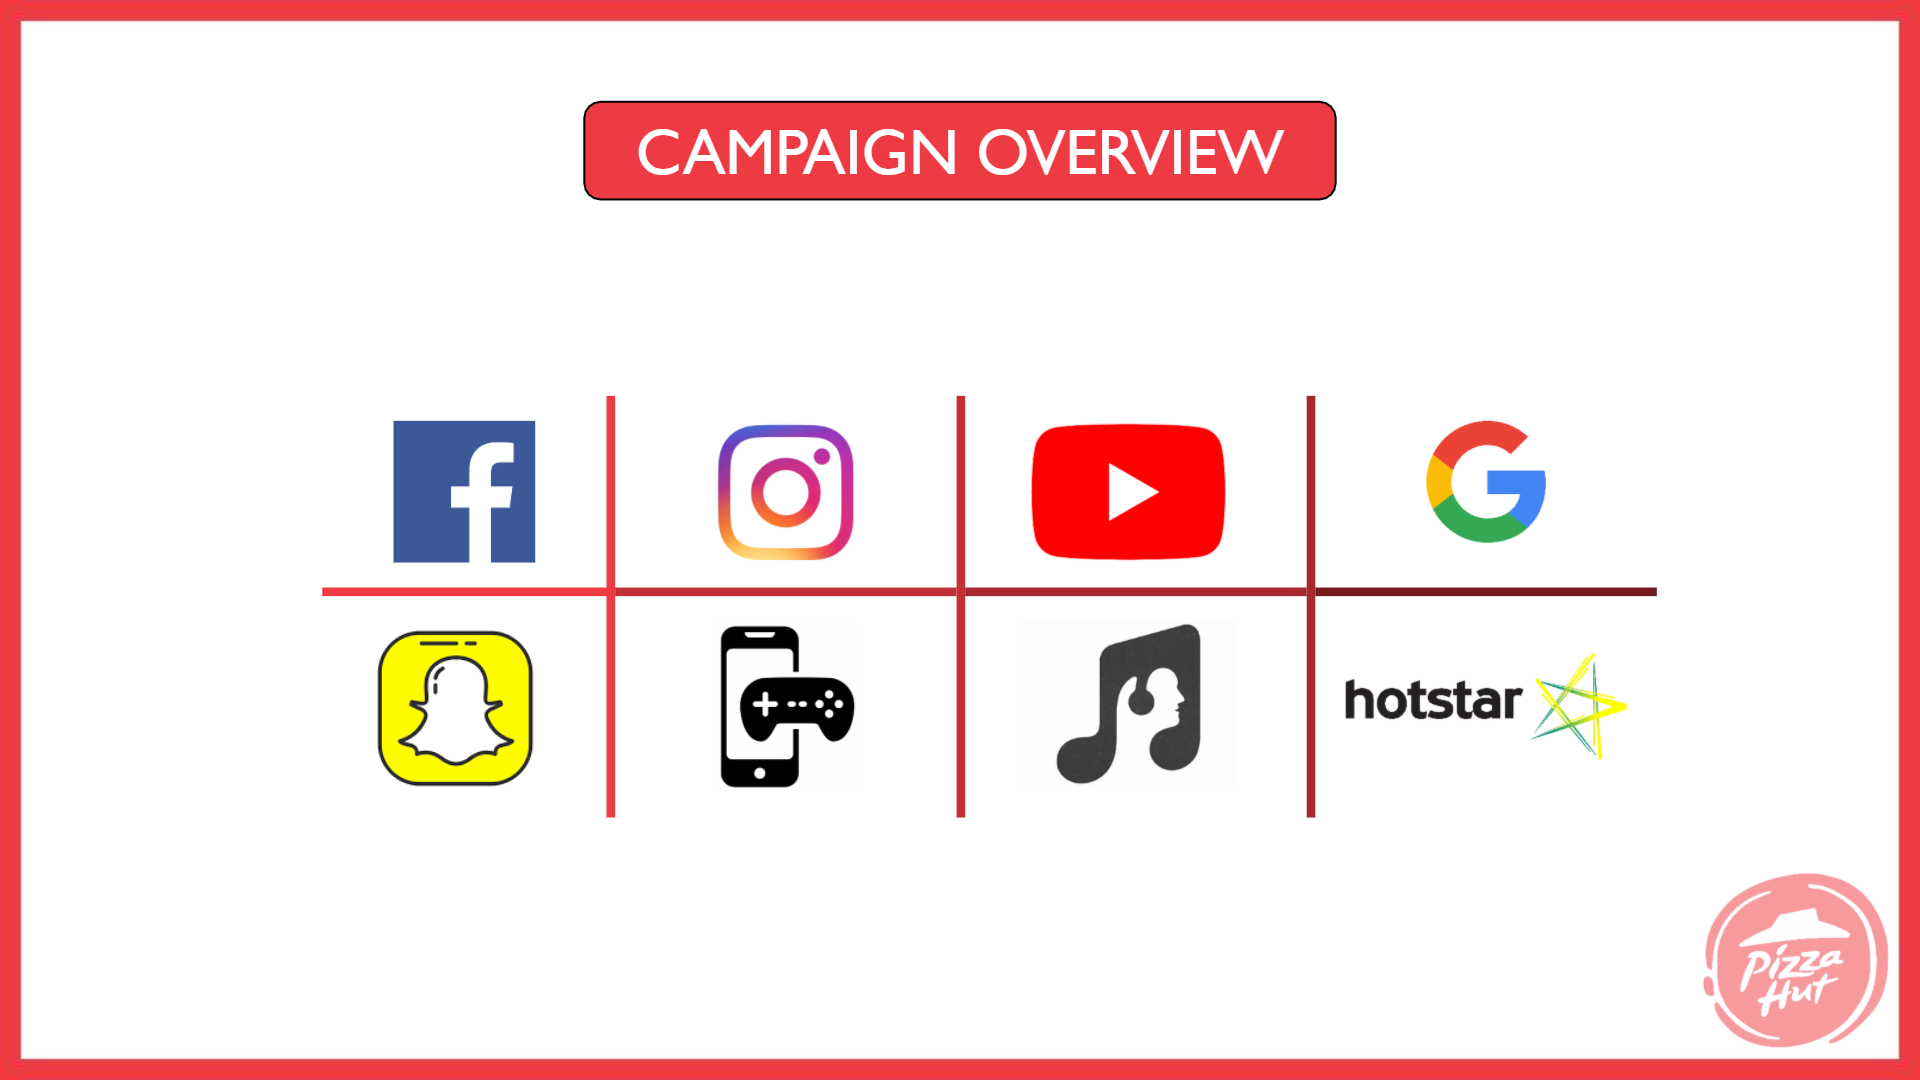 pizza hut marketing strategy Campaign Overview - Pizza Hut Marketing and Advertising Strategy